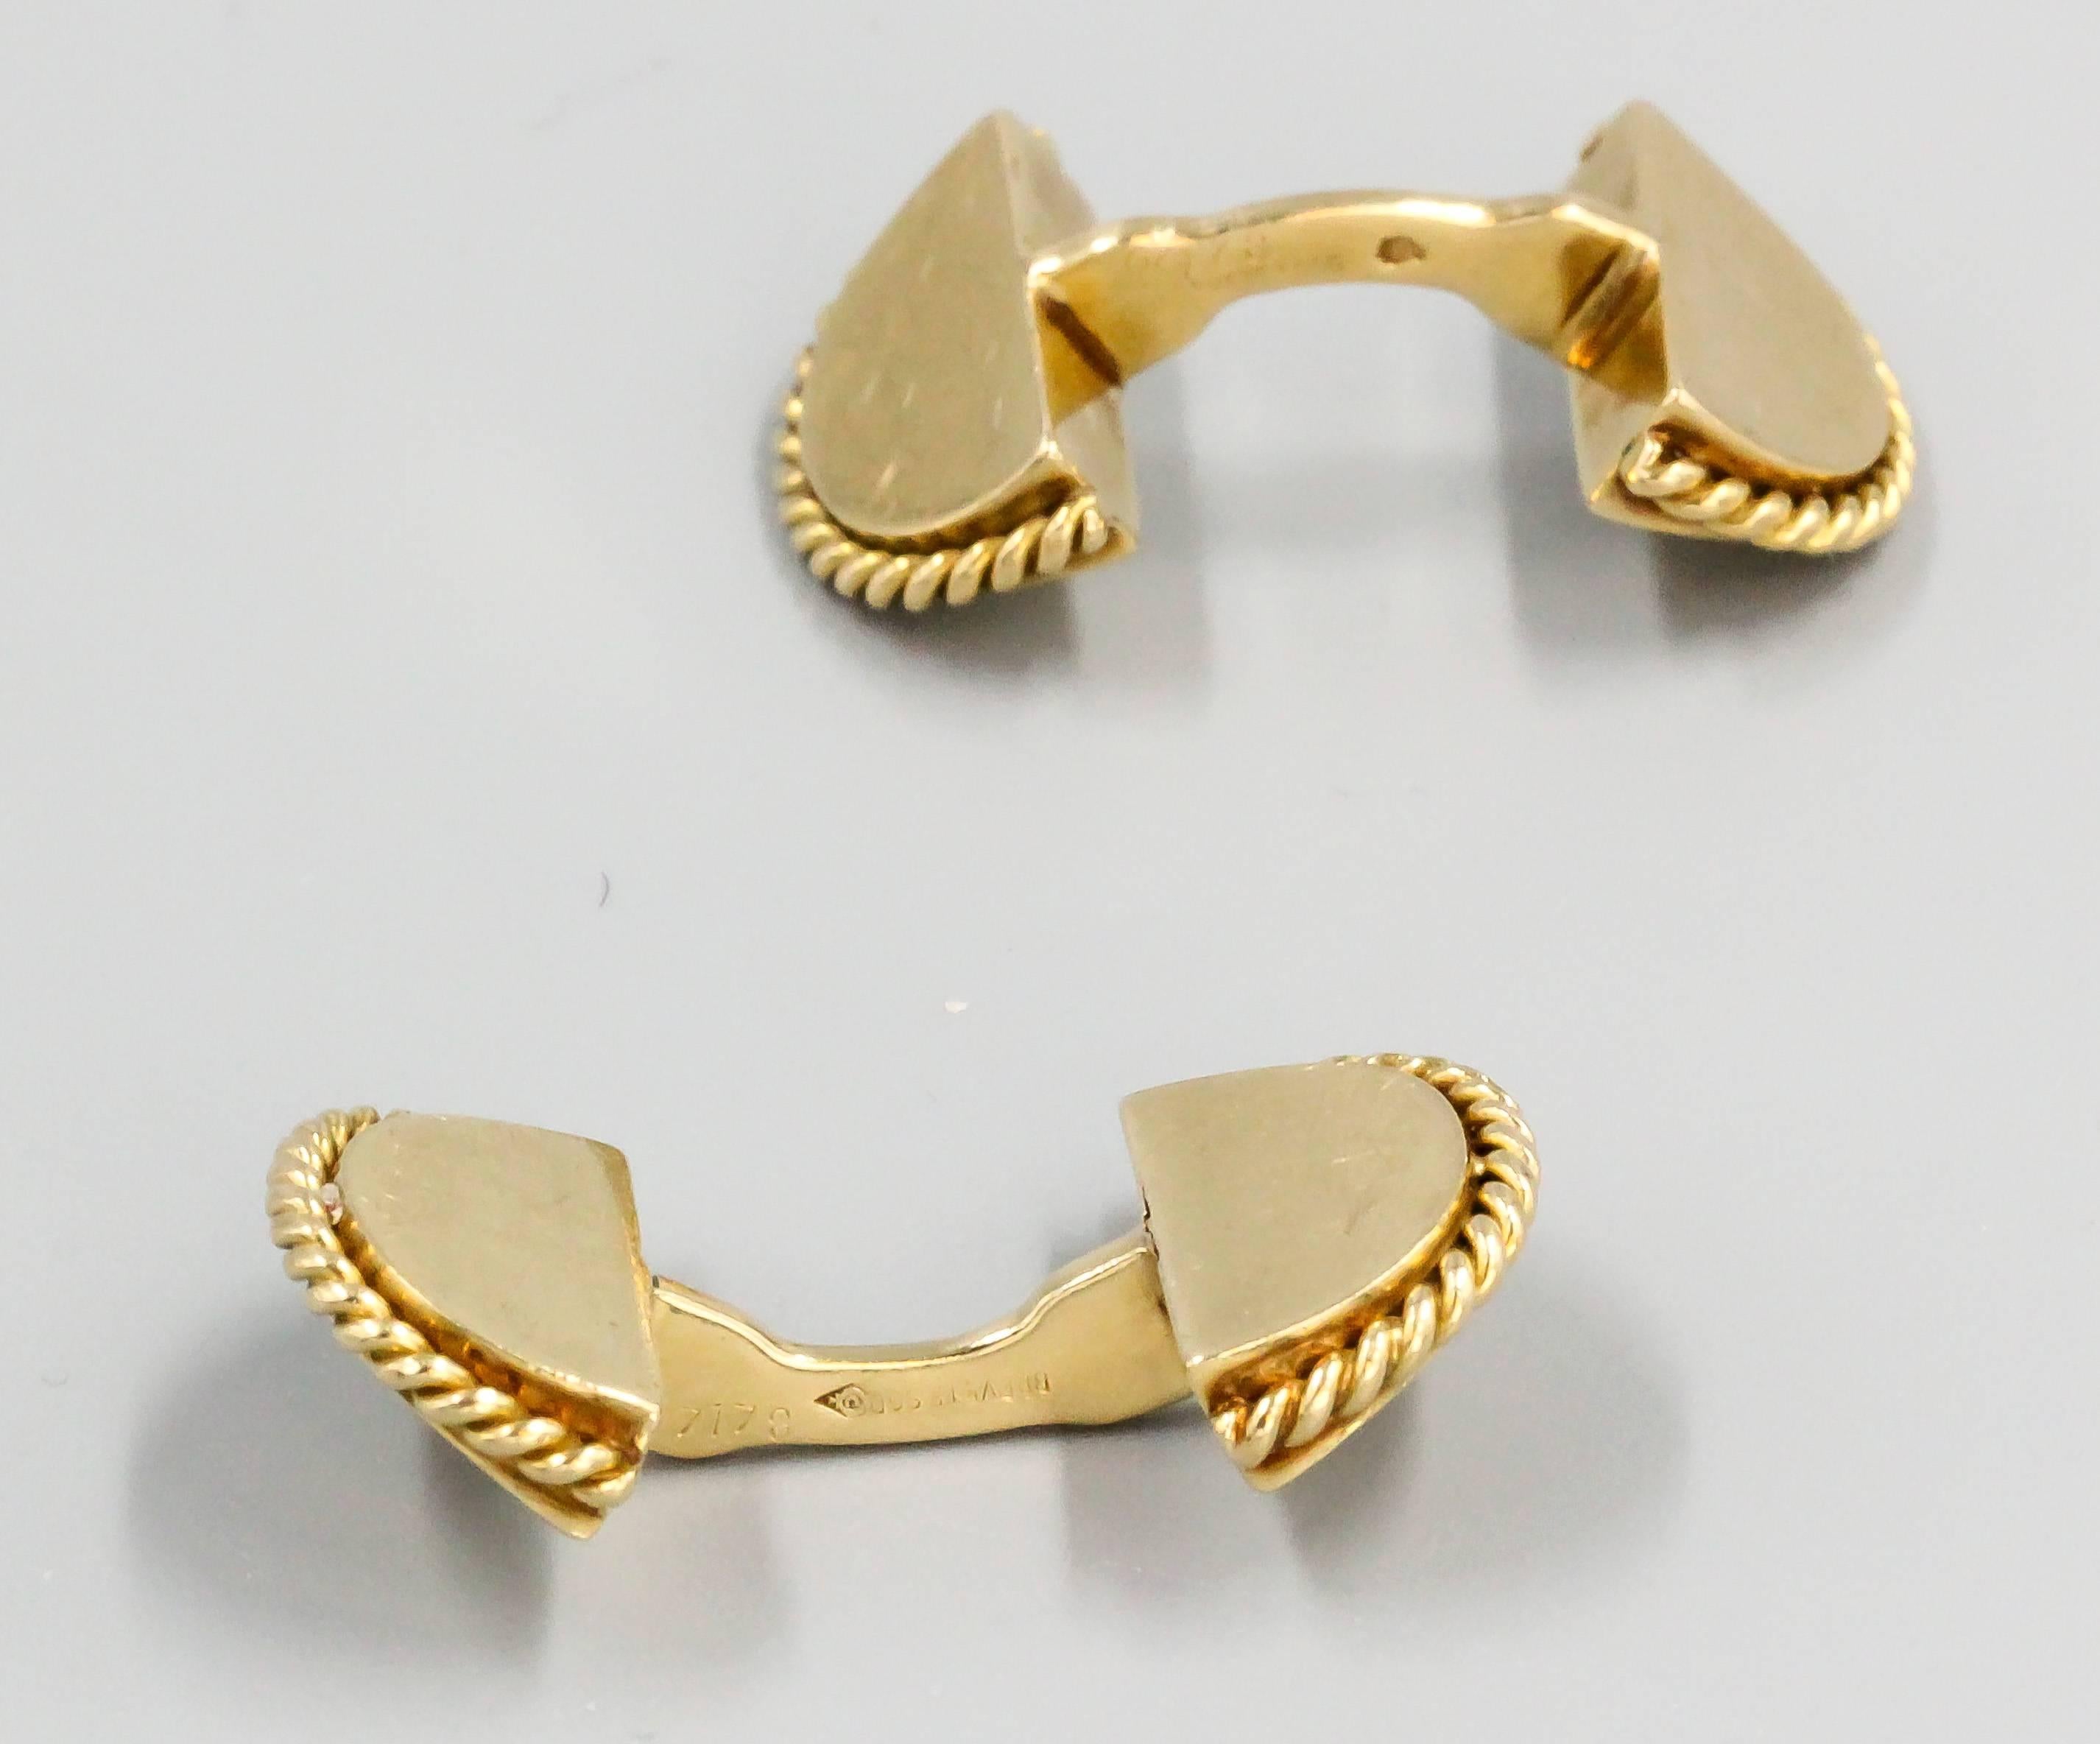 Handsome 18K yellow gold fan cufflinks by Cartier, circa 1940s. They resemble fans, with twisted rope on both ends. Beautifully made.

Hallmarks: Cartier, 750, reference numbers, French 18K gold assay mark